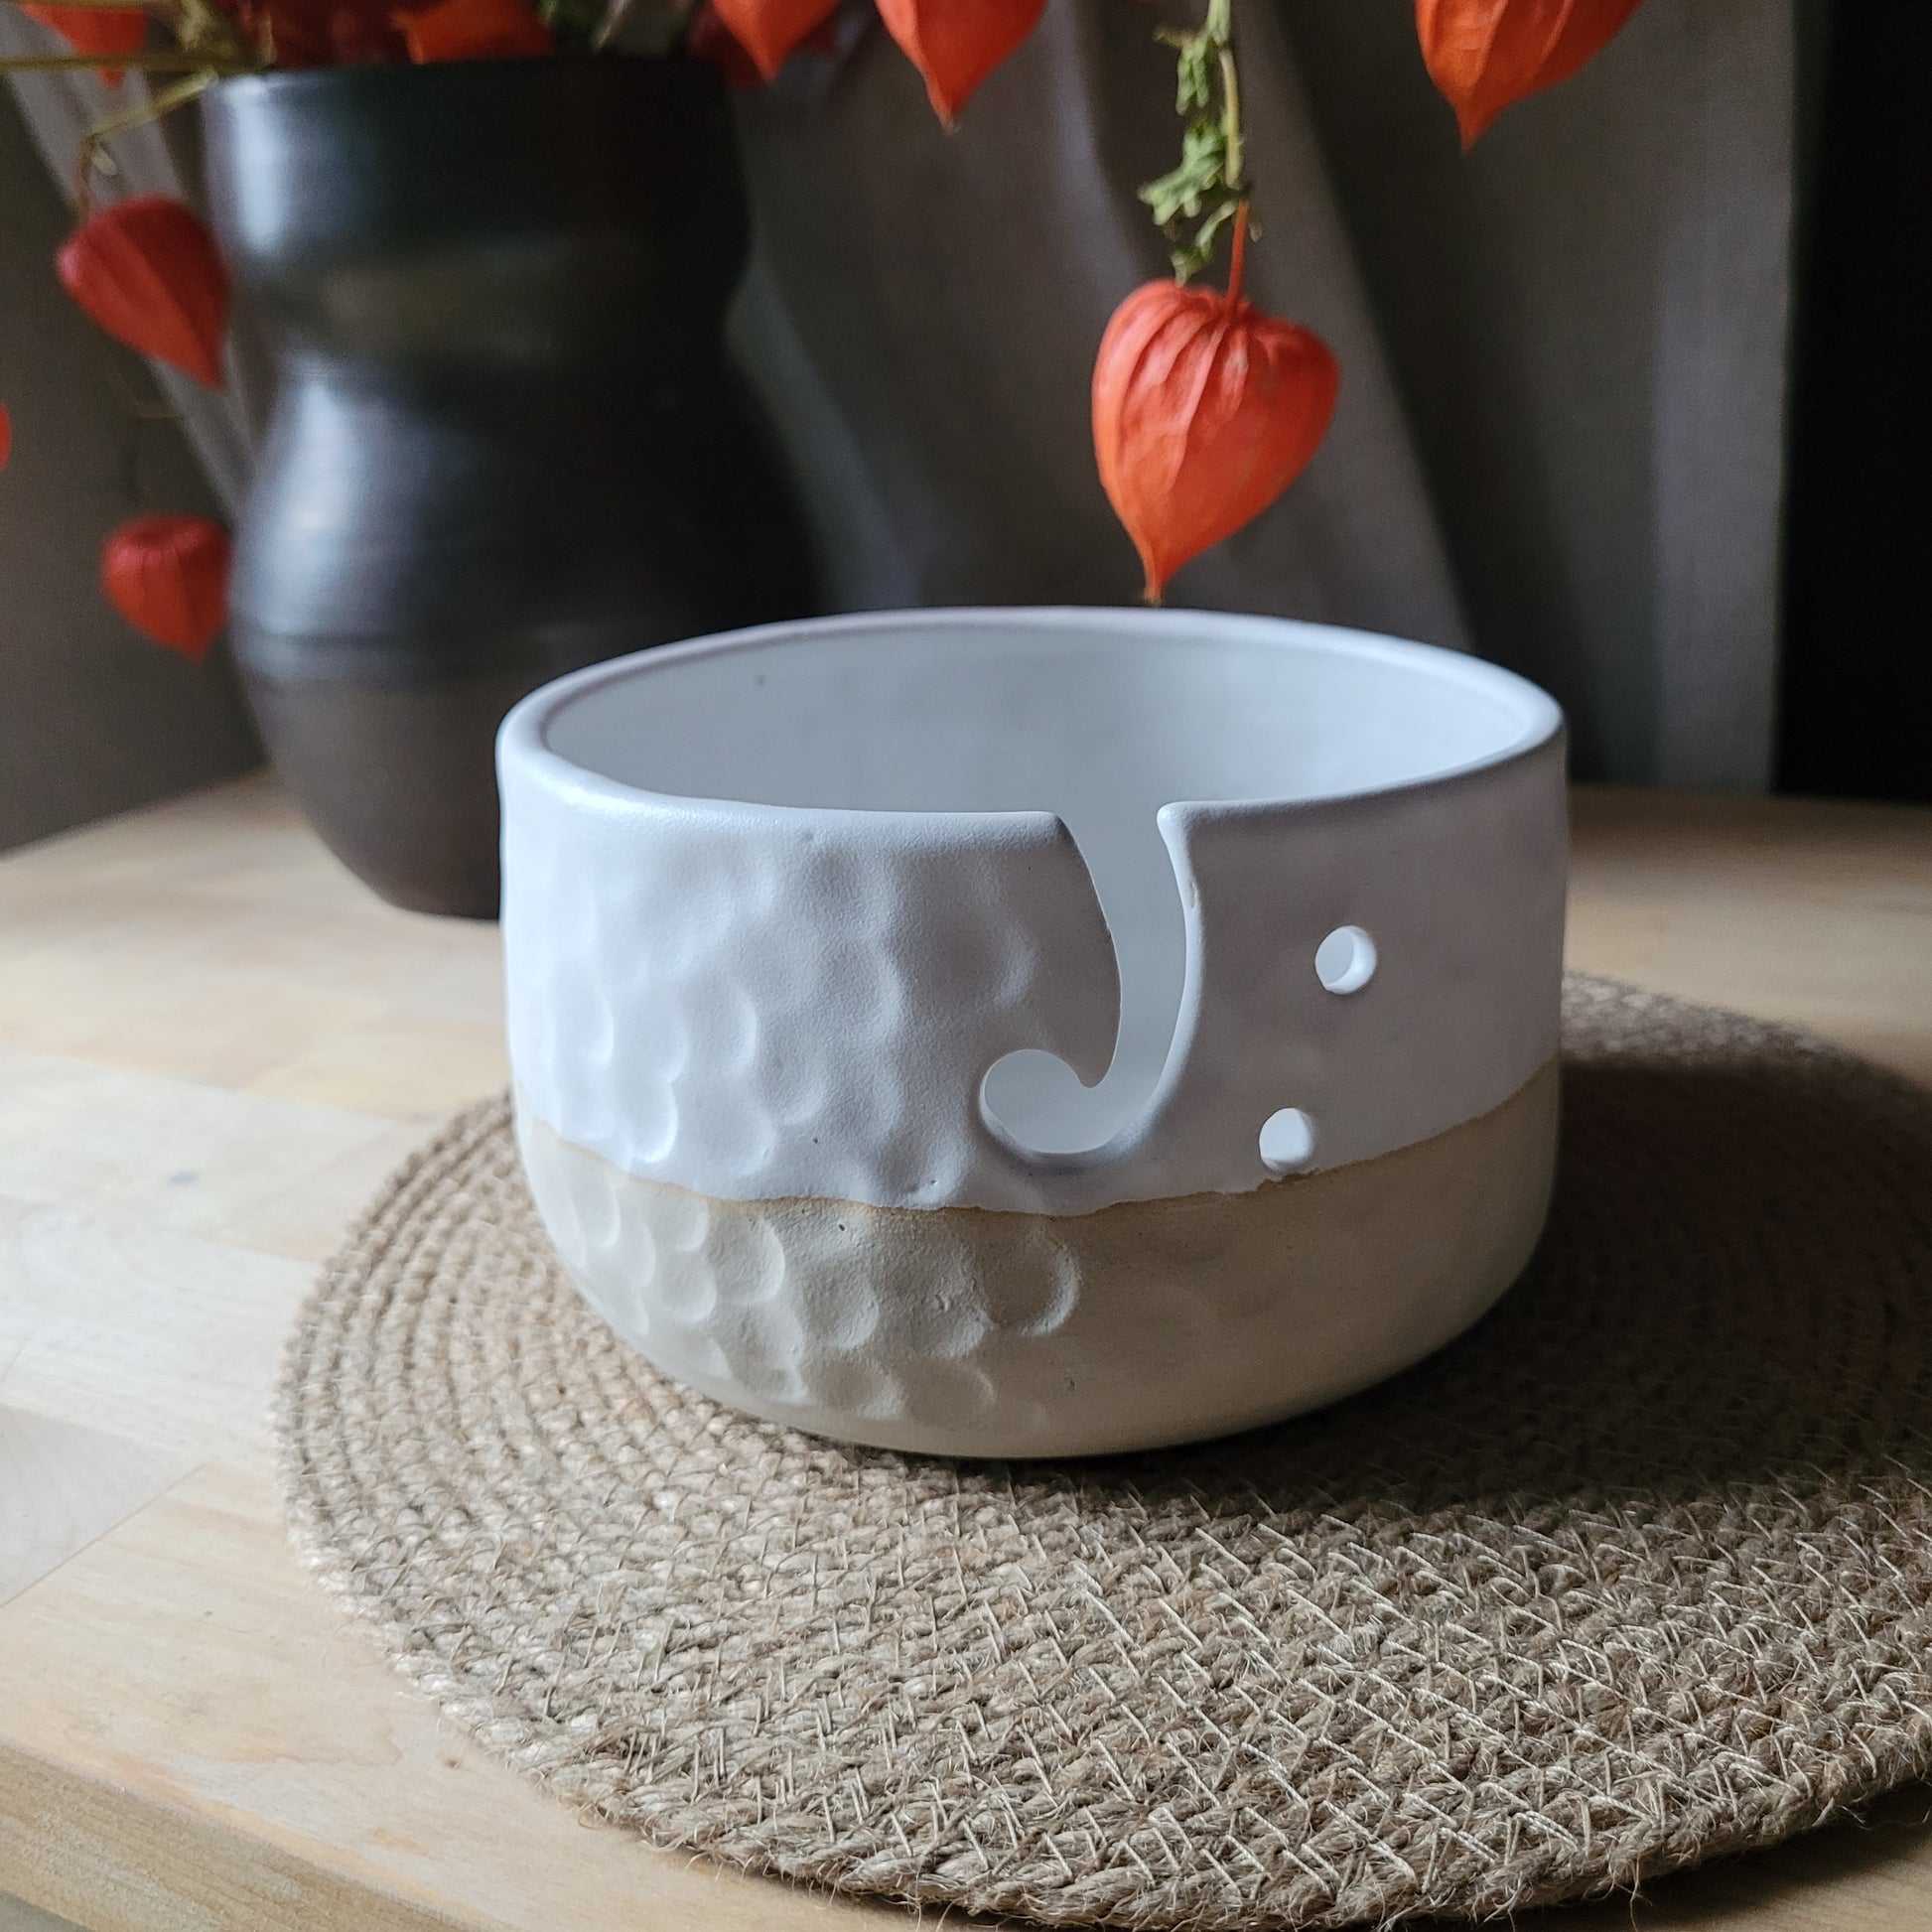 Eco-Friendly Ceramic Yarn Bowl - White with Matte Glaze and Textured Design. Crafted with care, this sustainable white yarn bowl features a matte glaze and a textured design. Keep your yarn organized and eco-conscious with this handmade ceramic piece, perfect for supporting a greener approach to your crafting adventures.